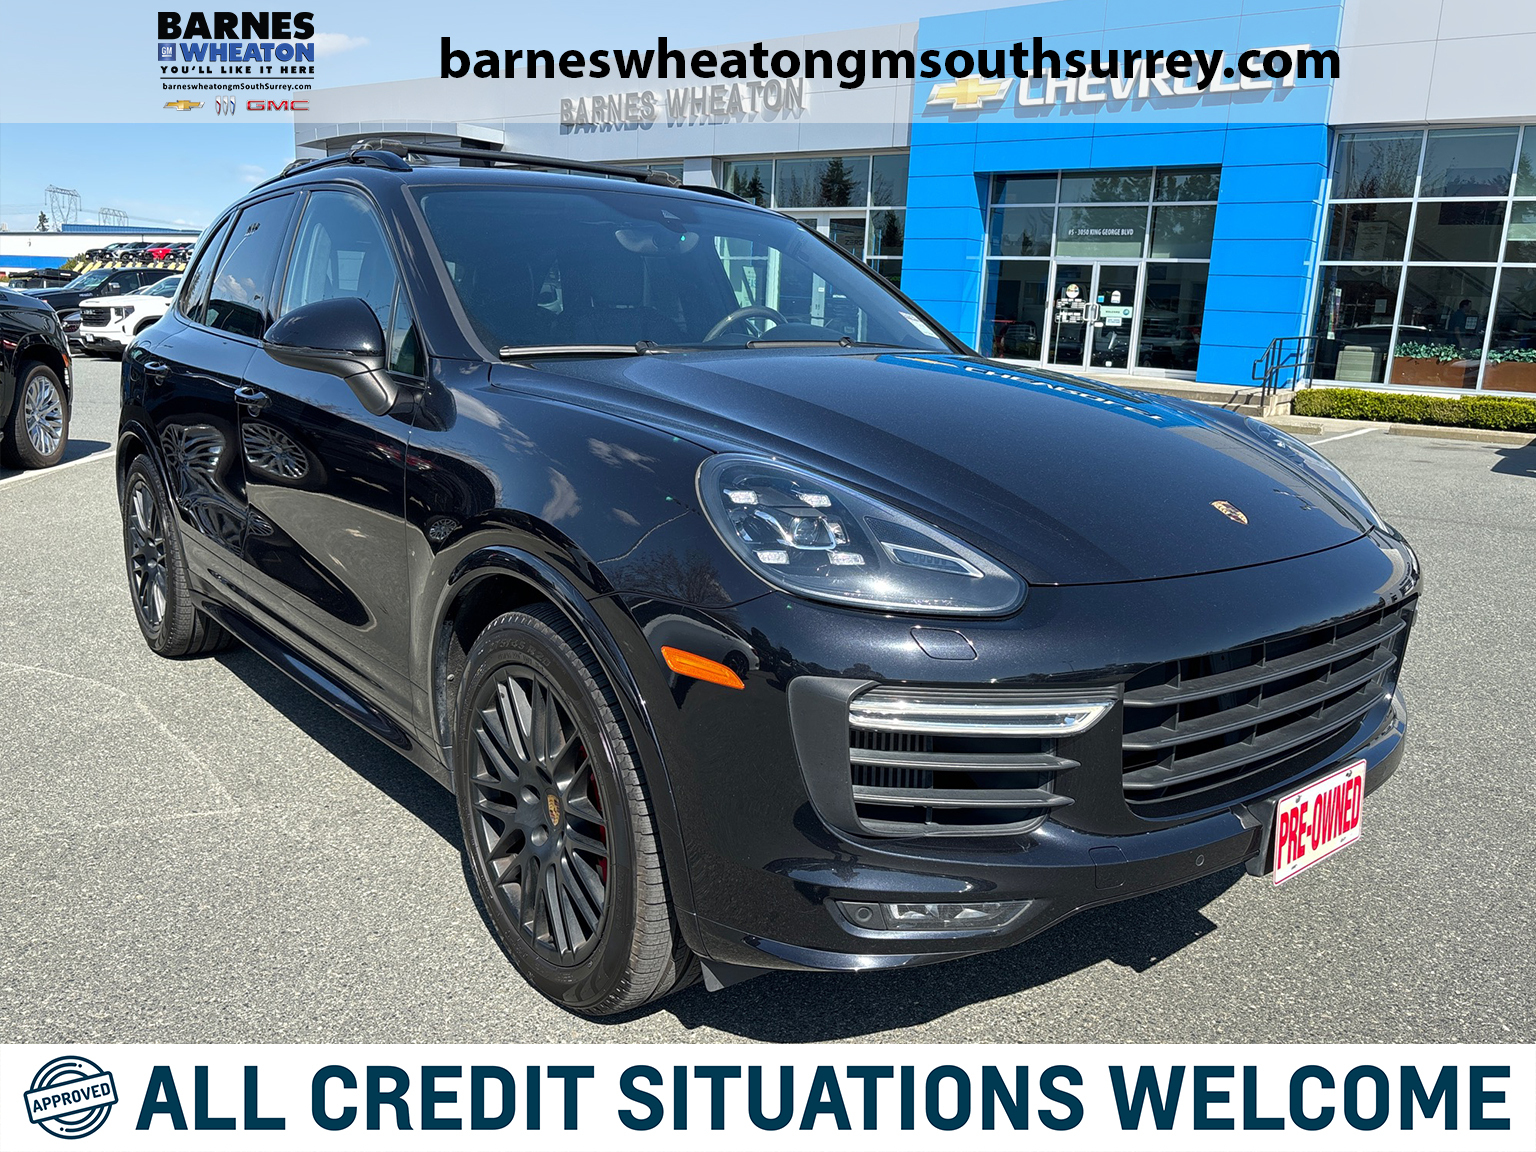 2016 Porsche Cayenne AWD 4dr GTS, new tires, new brakes, full service